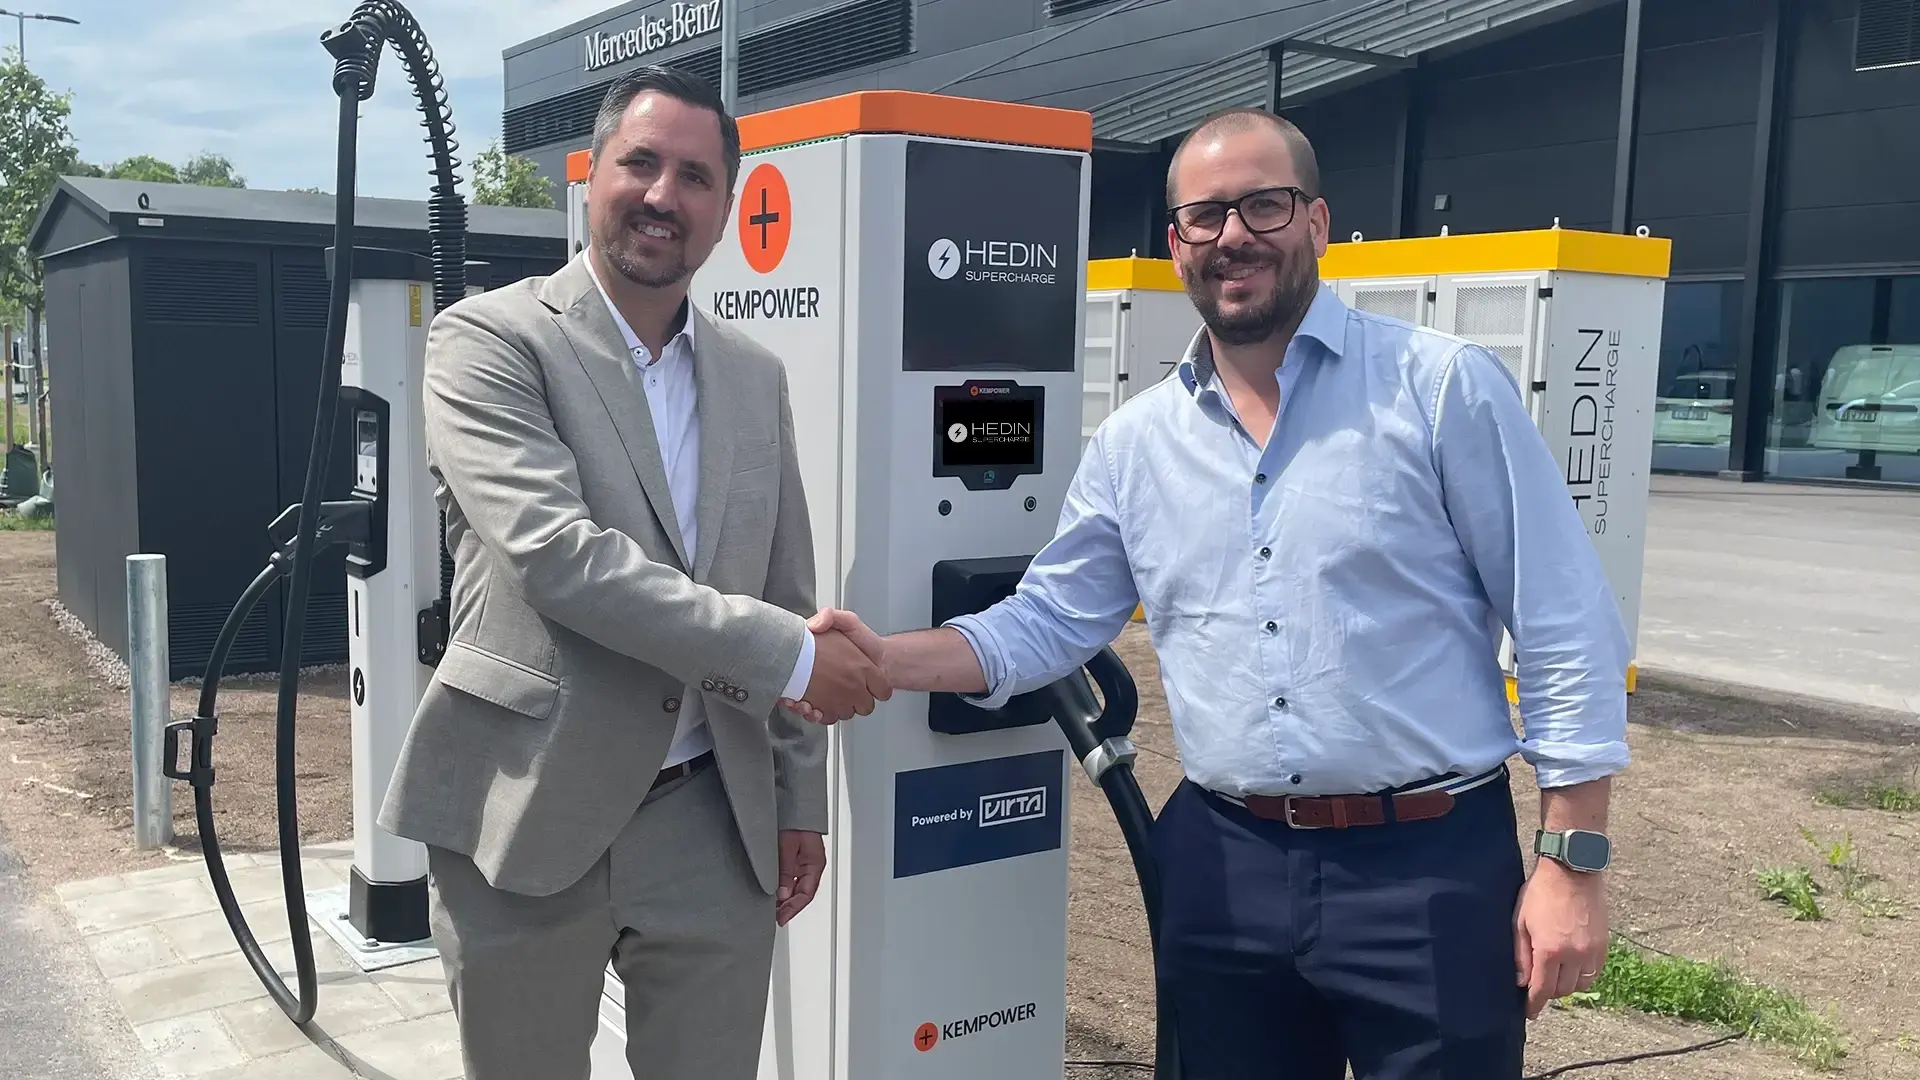 Megawatt charger for EVs Hedin Supercharge and Virta in Linköping